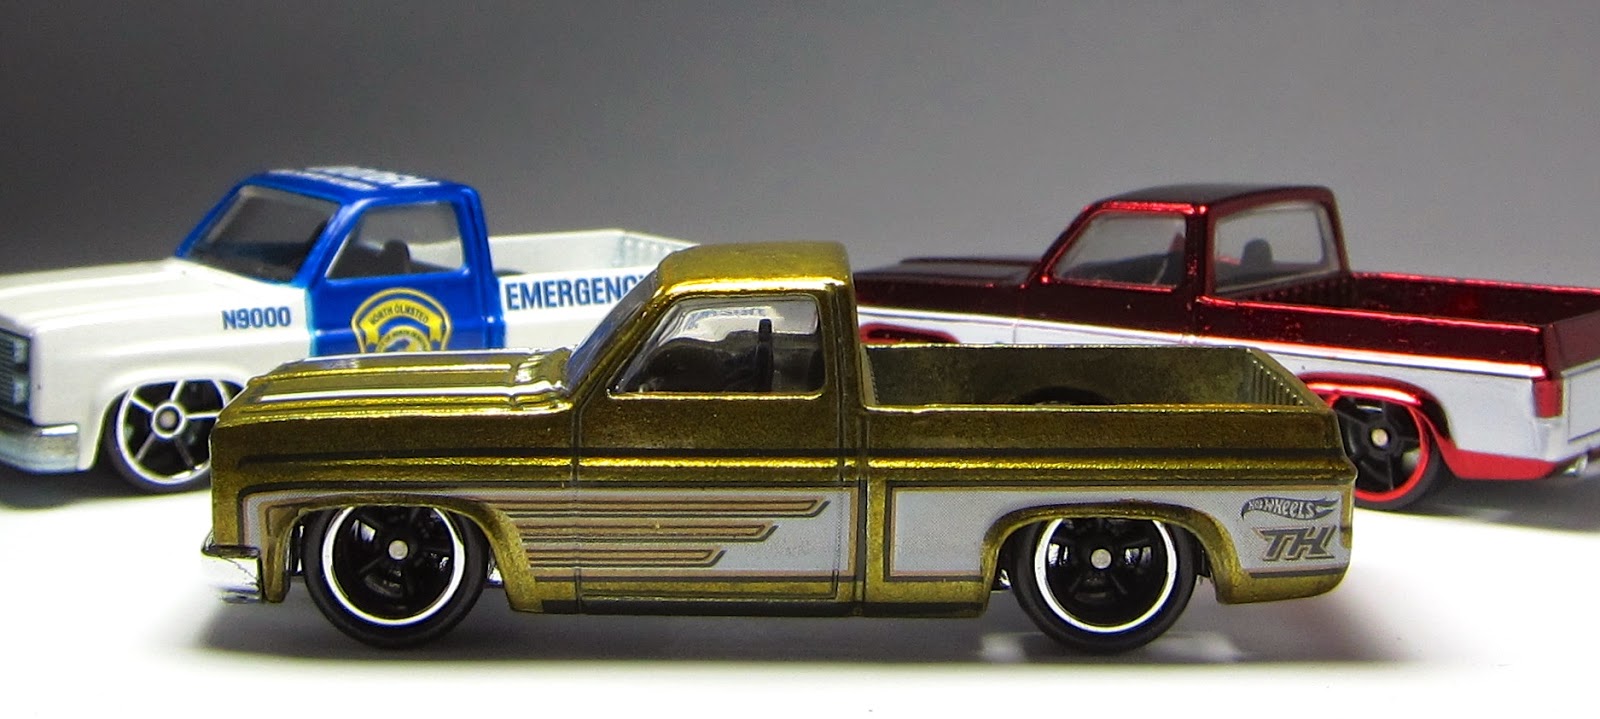 Cool is Cool is Cool: Hot Wheels '83 Chevy Silverado, Part 2 - Modern ...